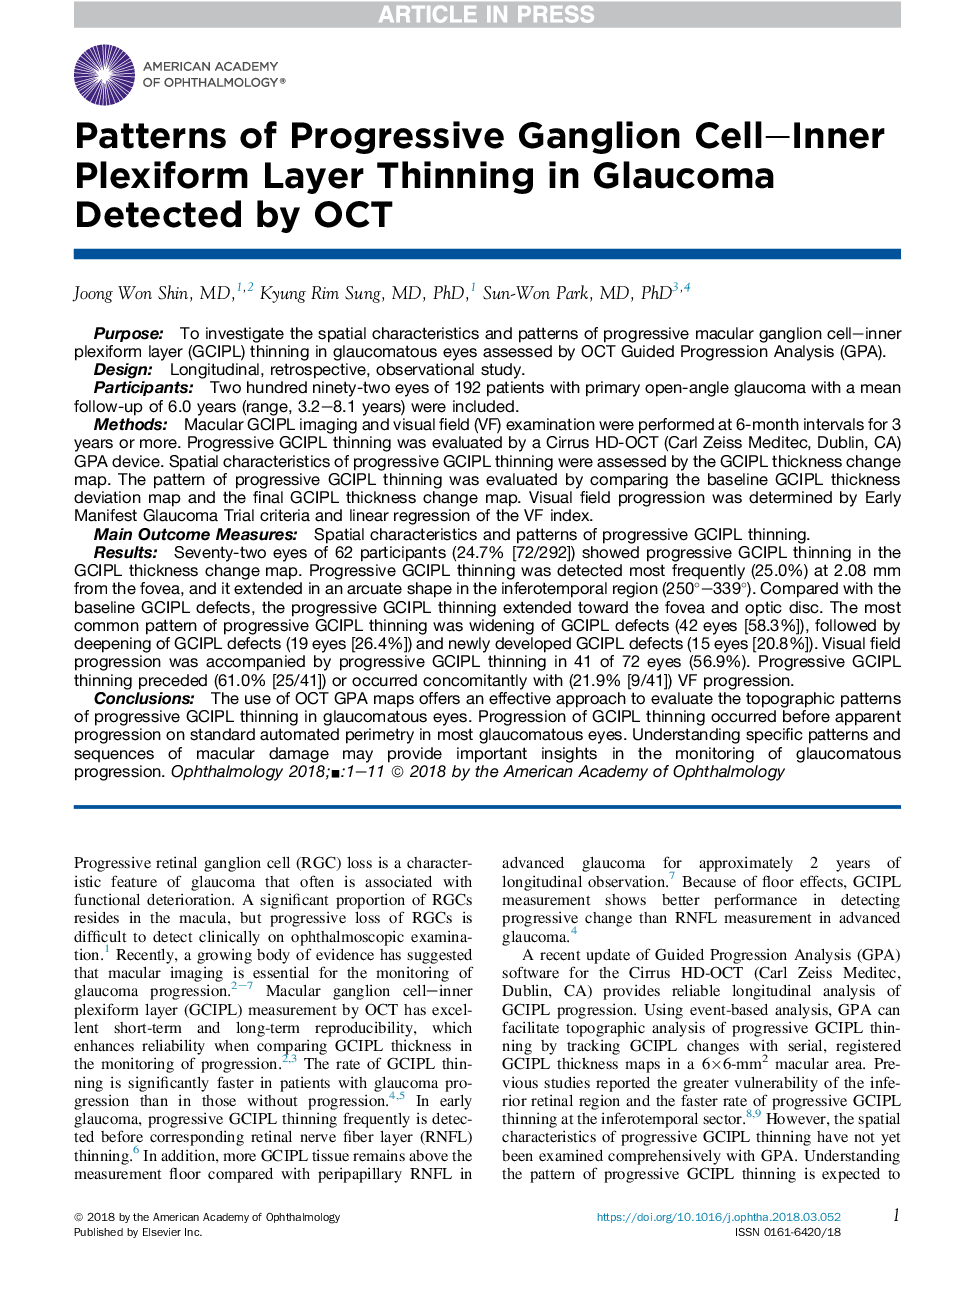 Patterns of Progressive Ganglion Cell-Inner Plexiform Layer Thinning in Glaucoma Detected by OCT